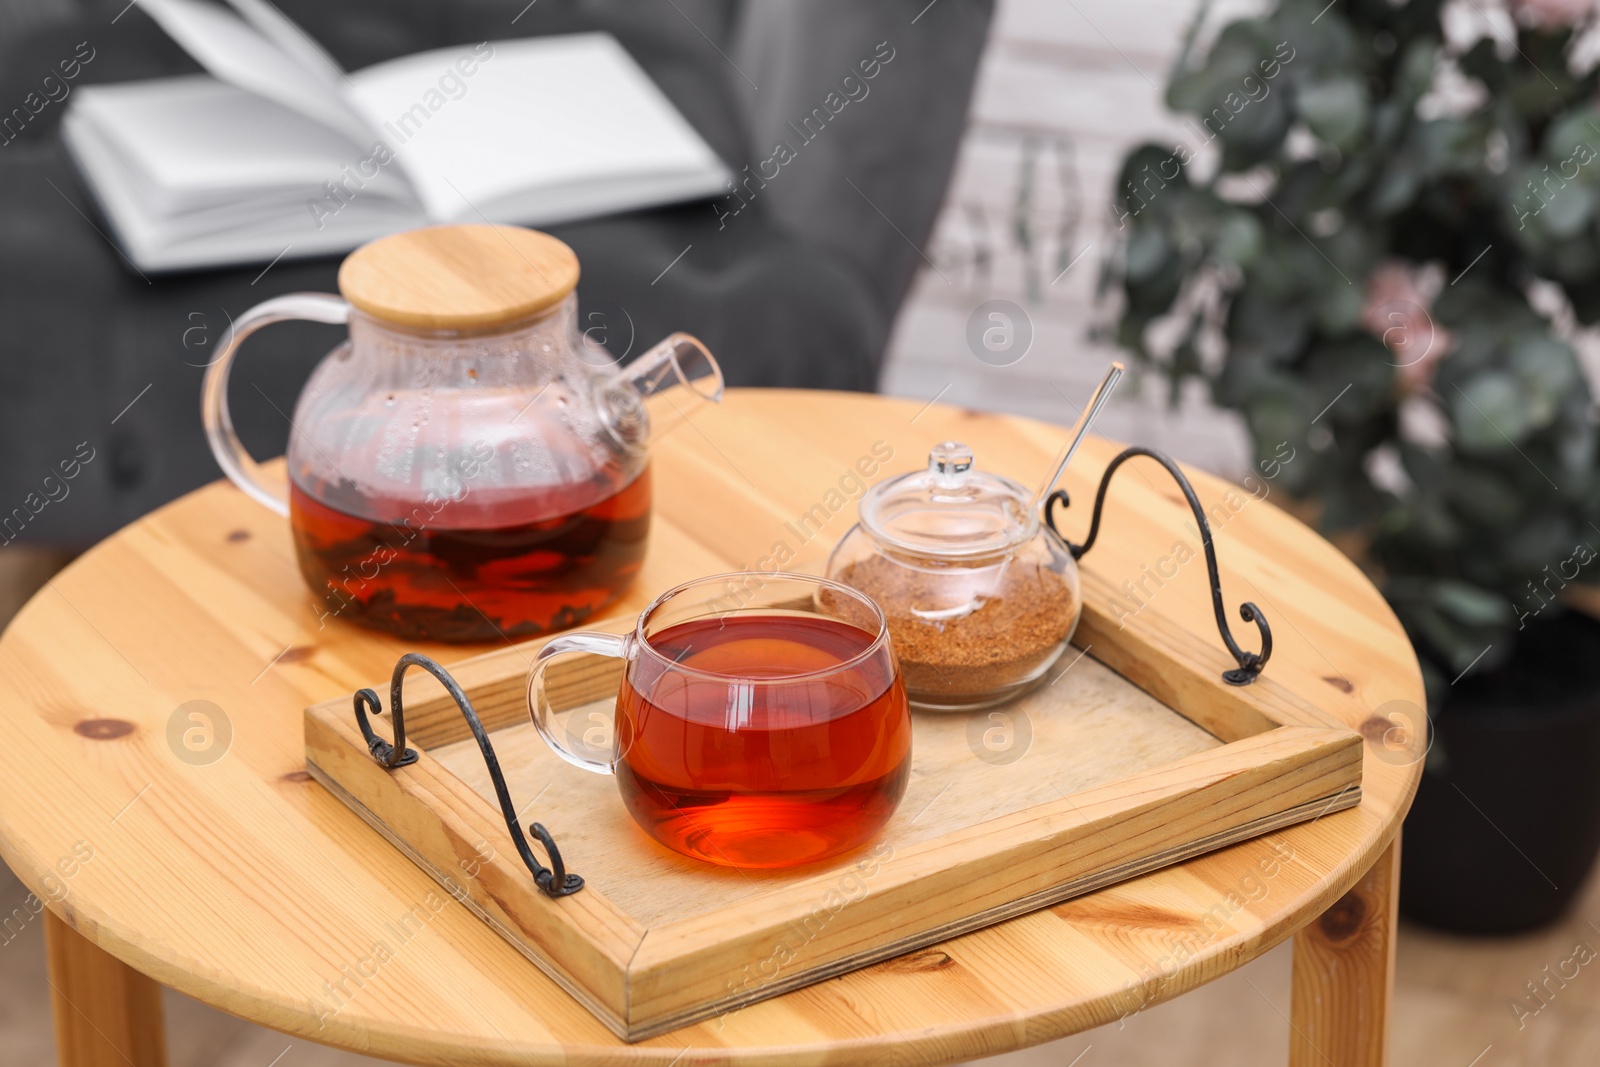 Photo of Teapot, cup of aromatic tea and brown sugar on wooden table indoors